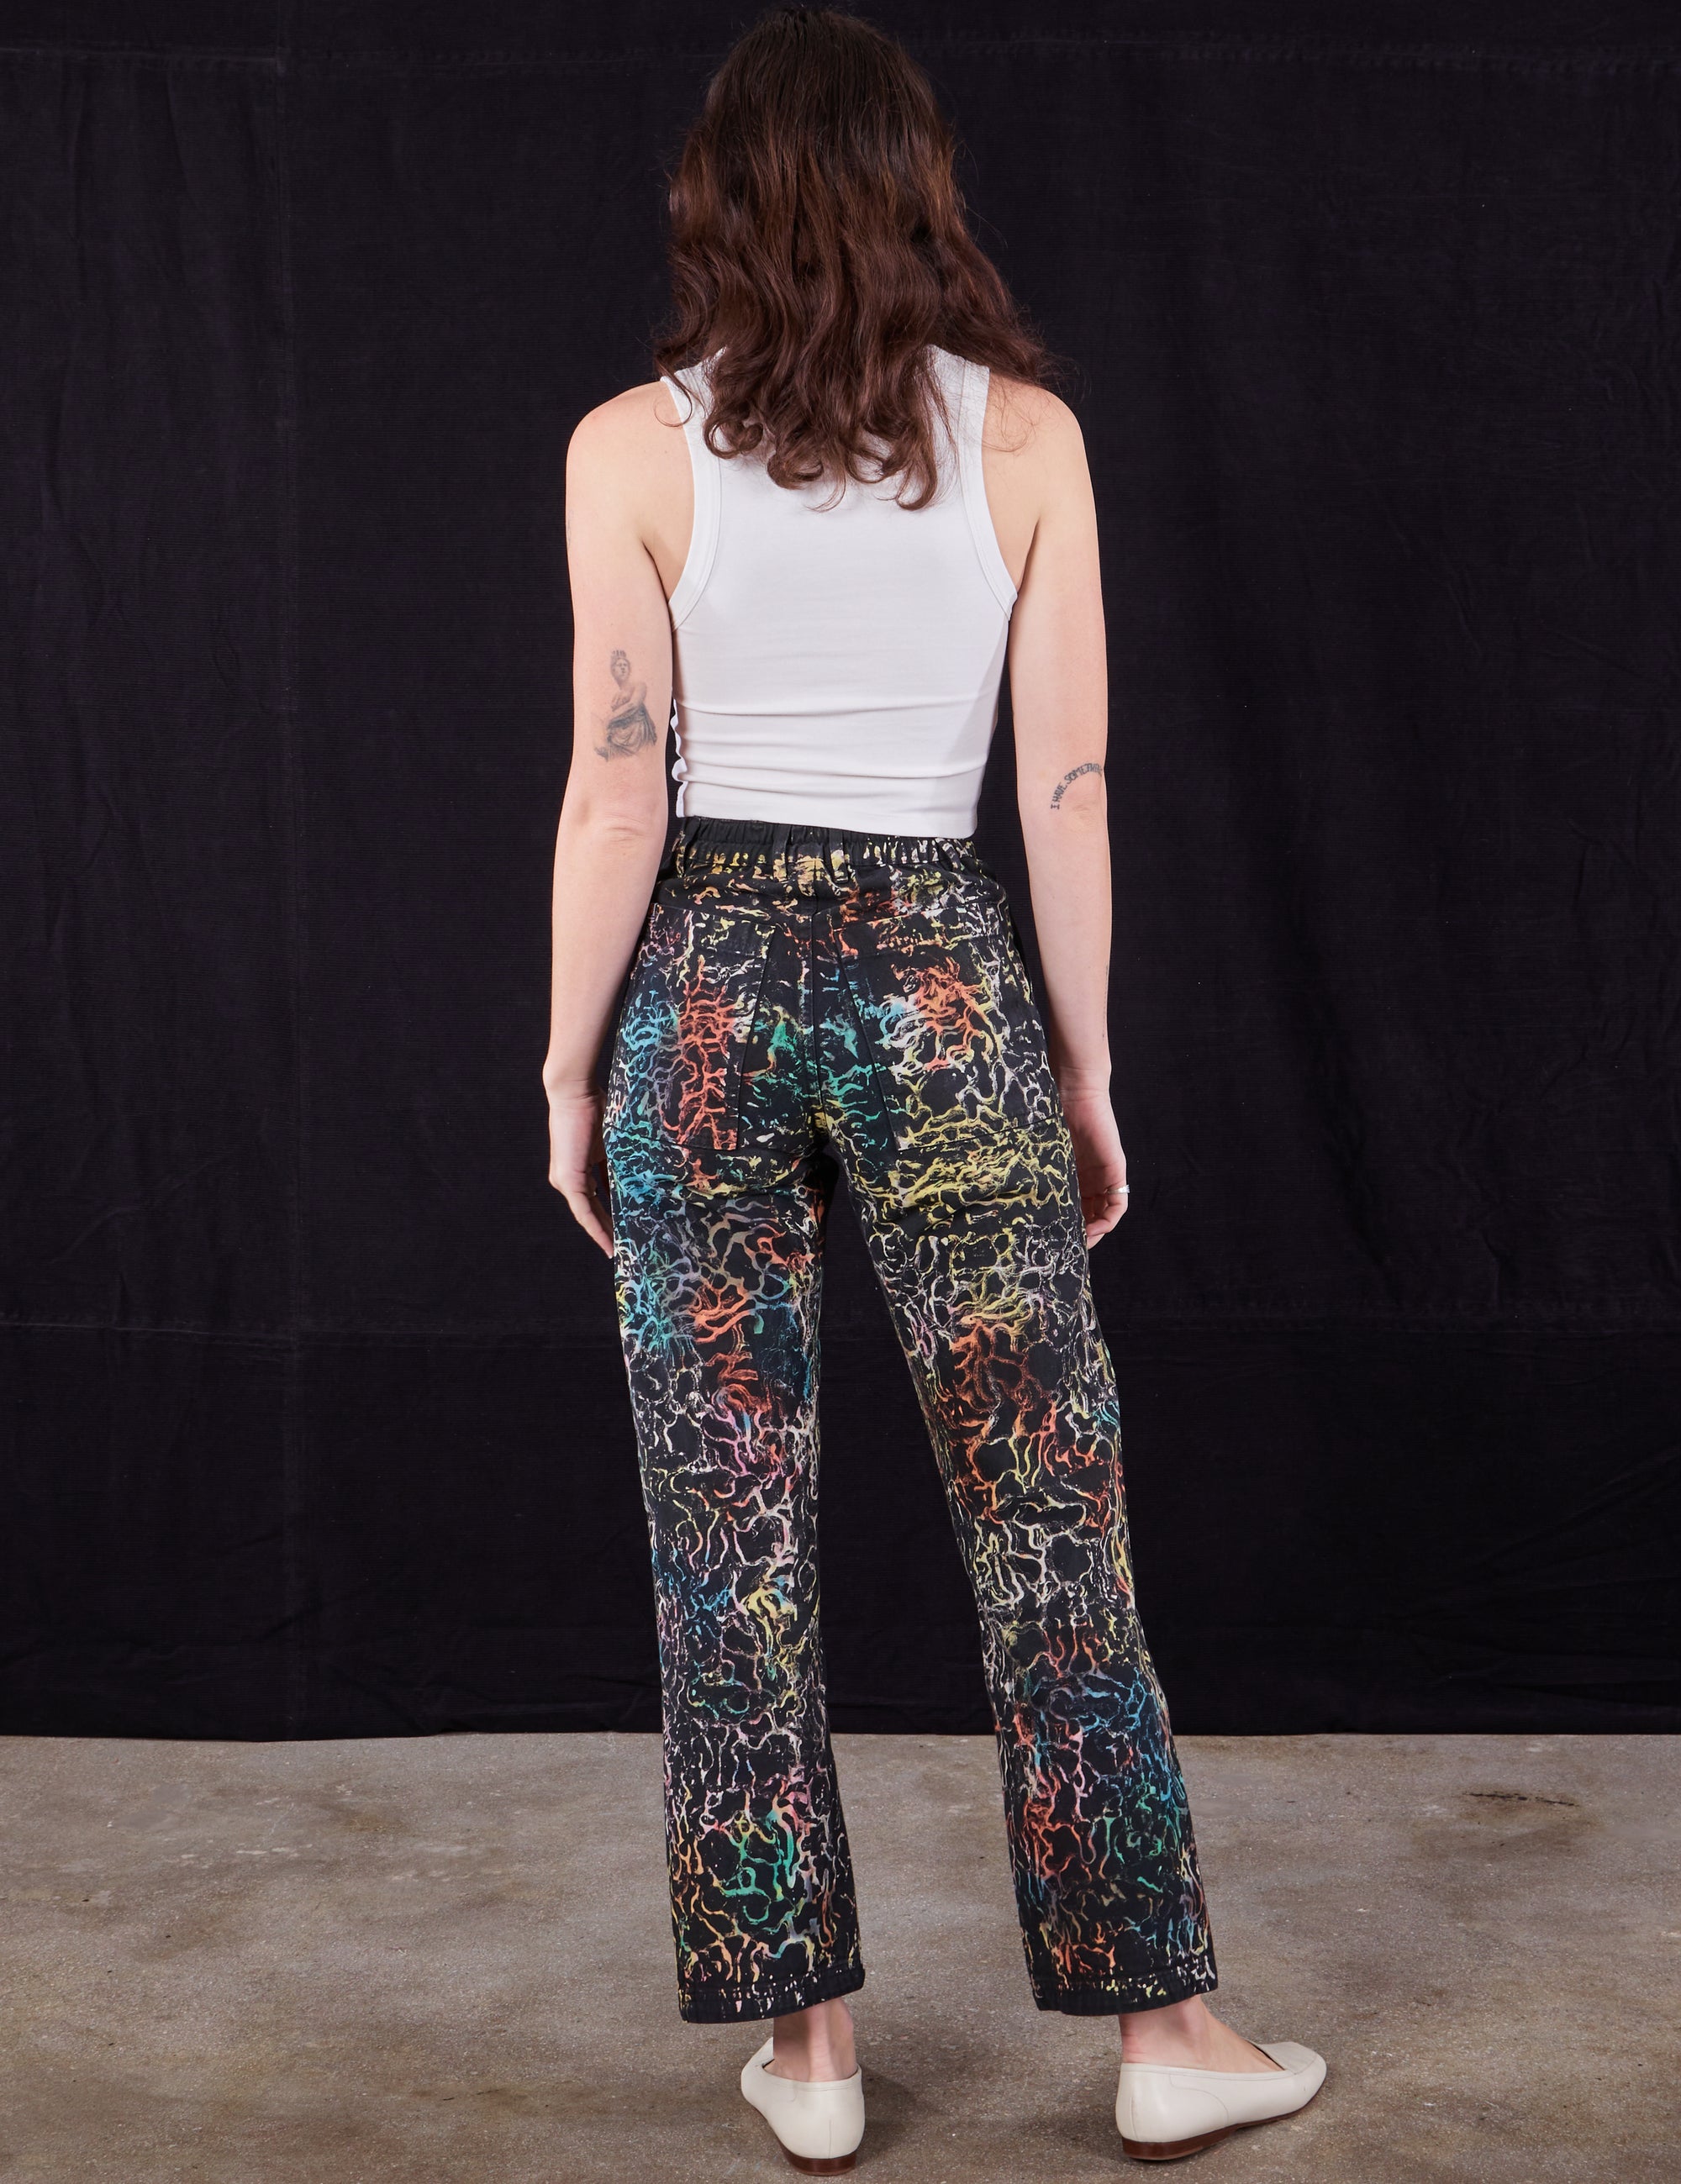 Back view of Wavy Dye Work Pants and Cropped Tank in vintage tee off-white on Alex